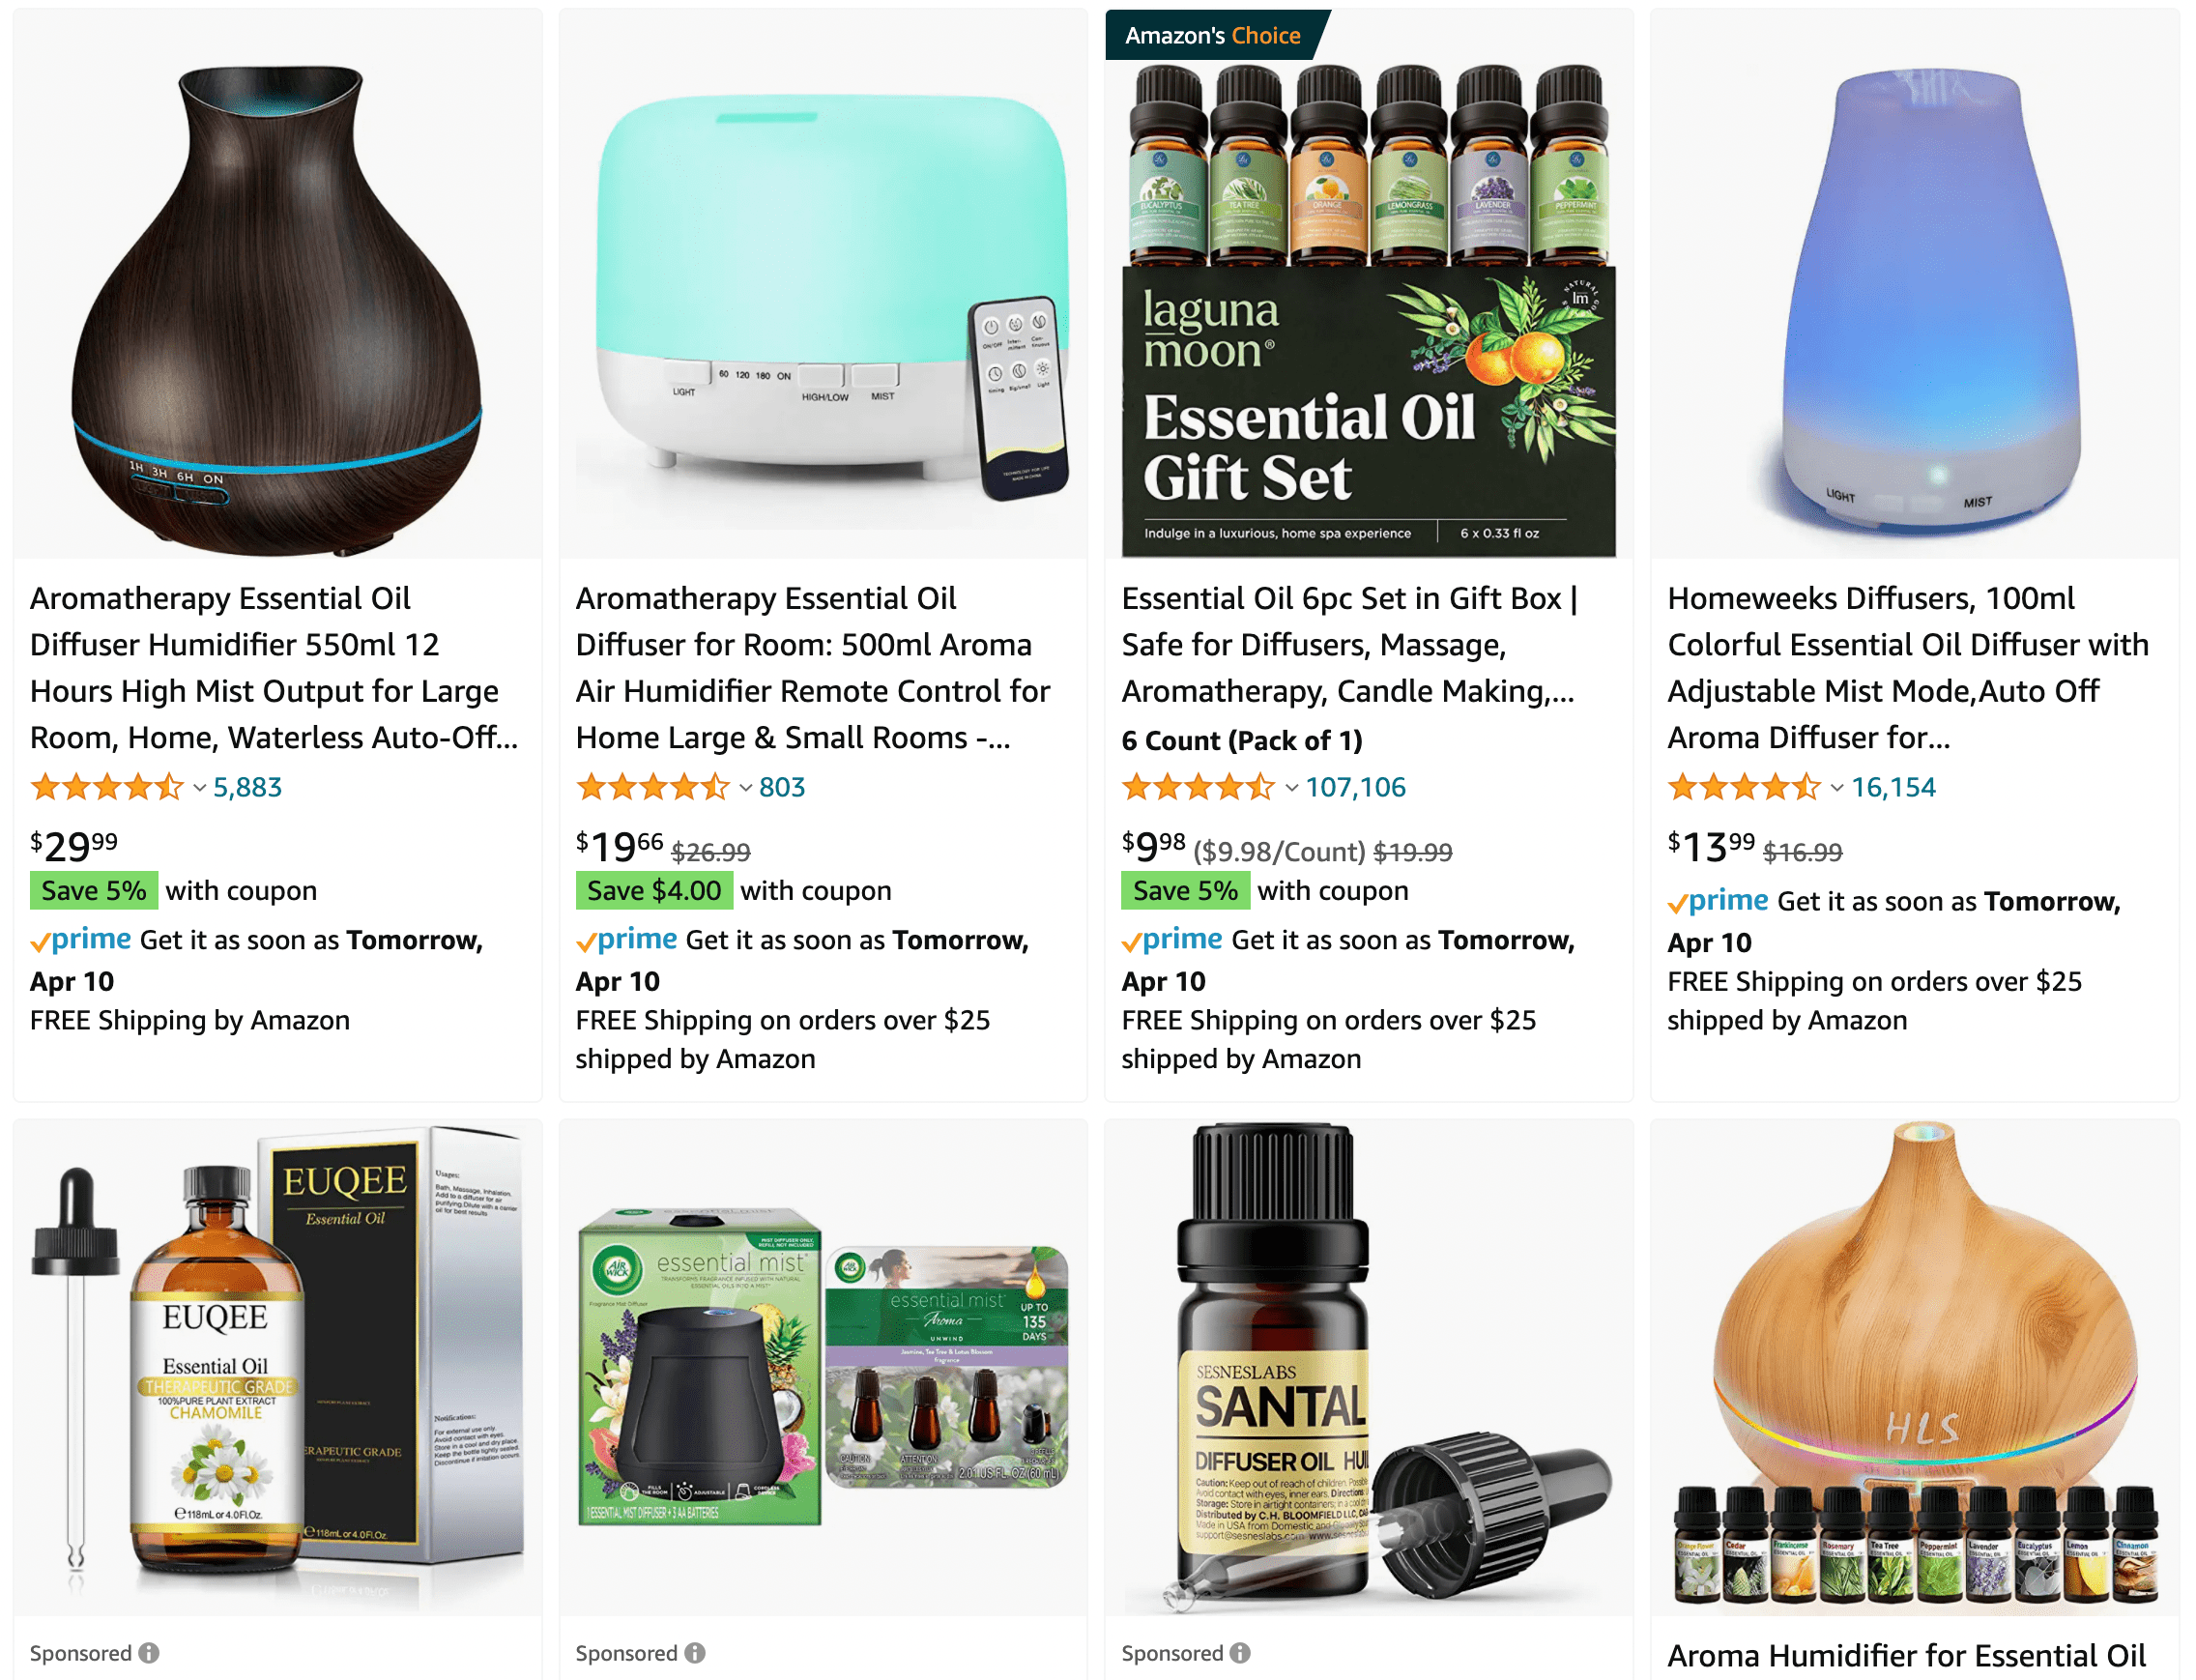 Essential oils and diffusers for sale on Amazon.